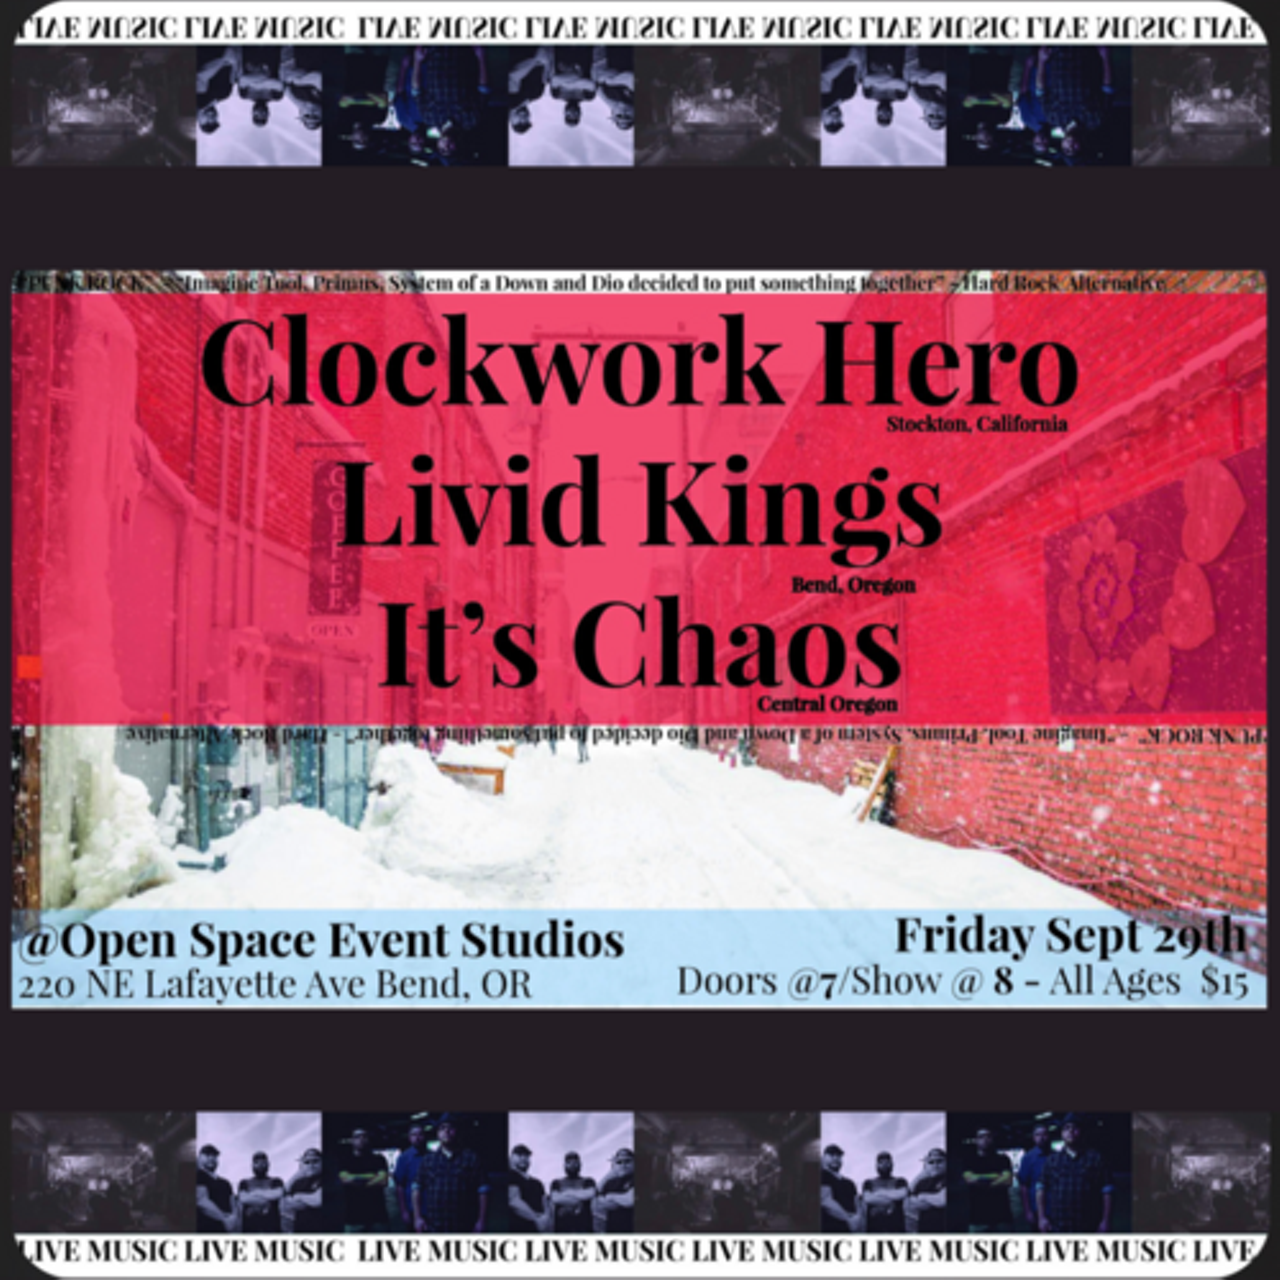 Clockwork Hero, Livid Kings and Its Chaos Open Space Event Studios Live Music The Source Weekly